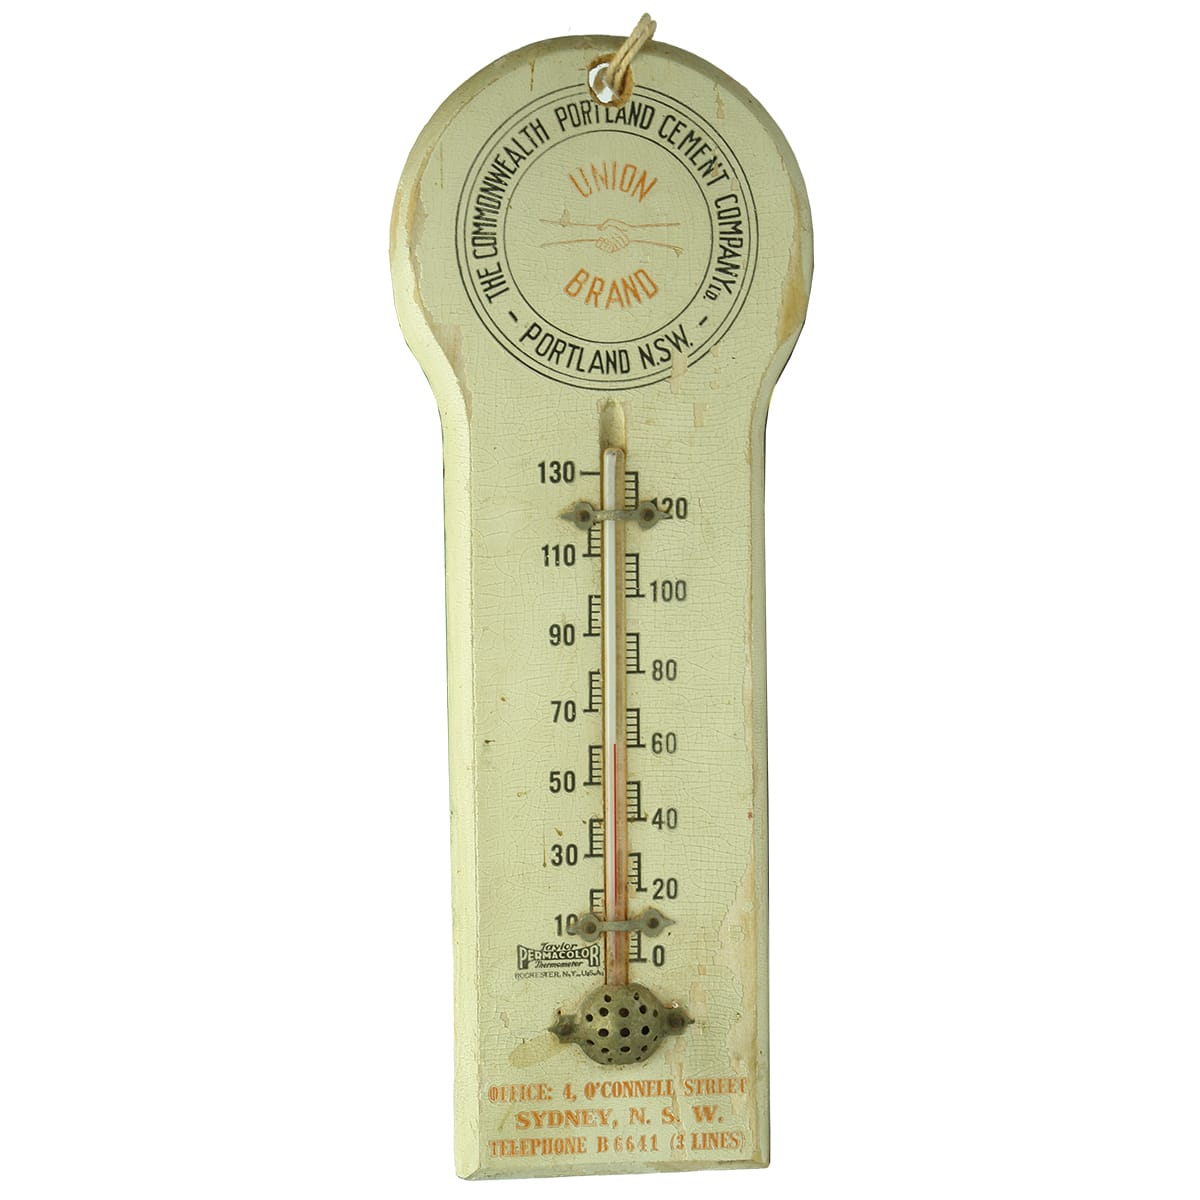 Advertising Thermometer. The Commonwealth Portland Cement Company, Sydney.